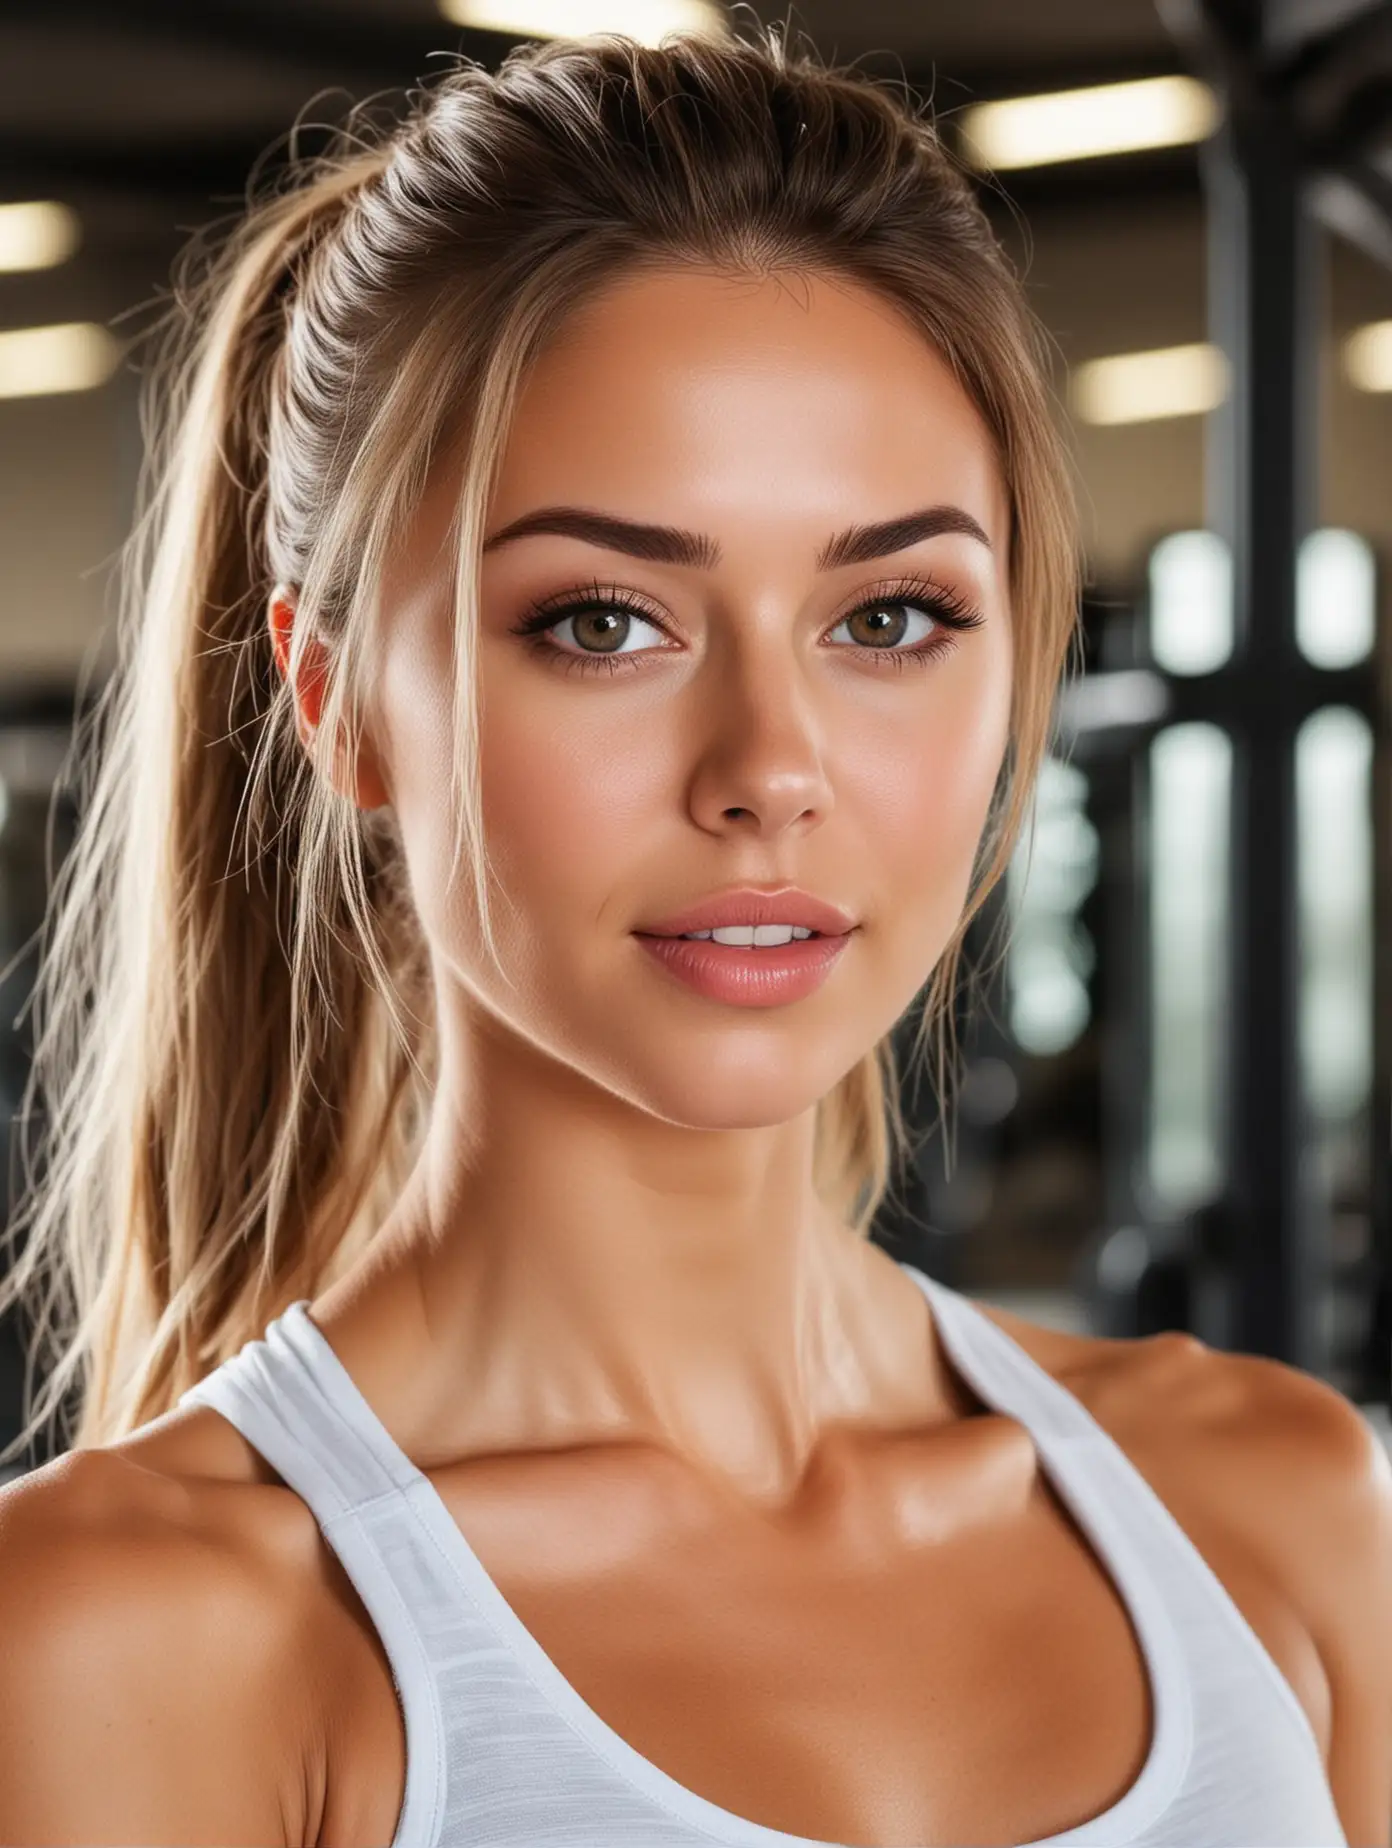 Exquisite Fitness Girl with Gym Background